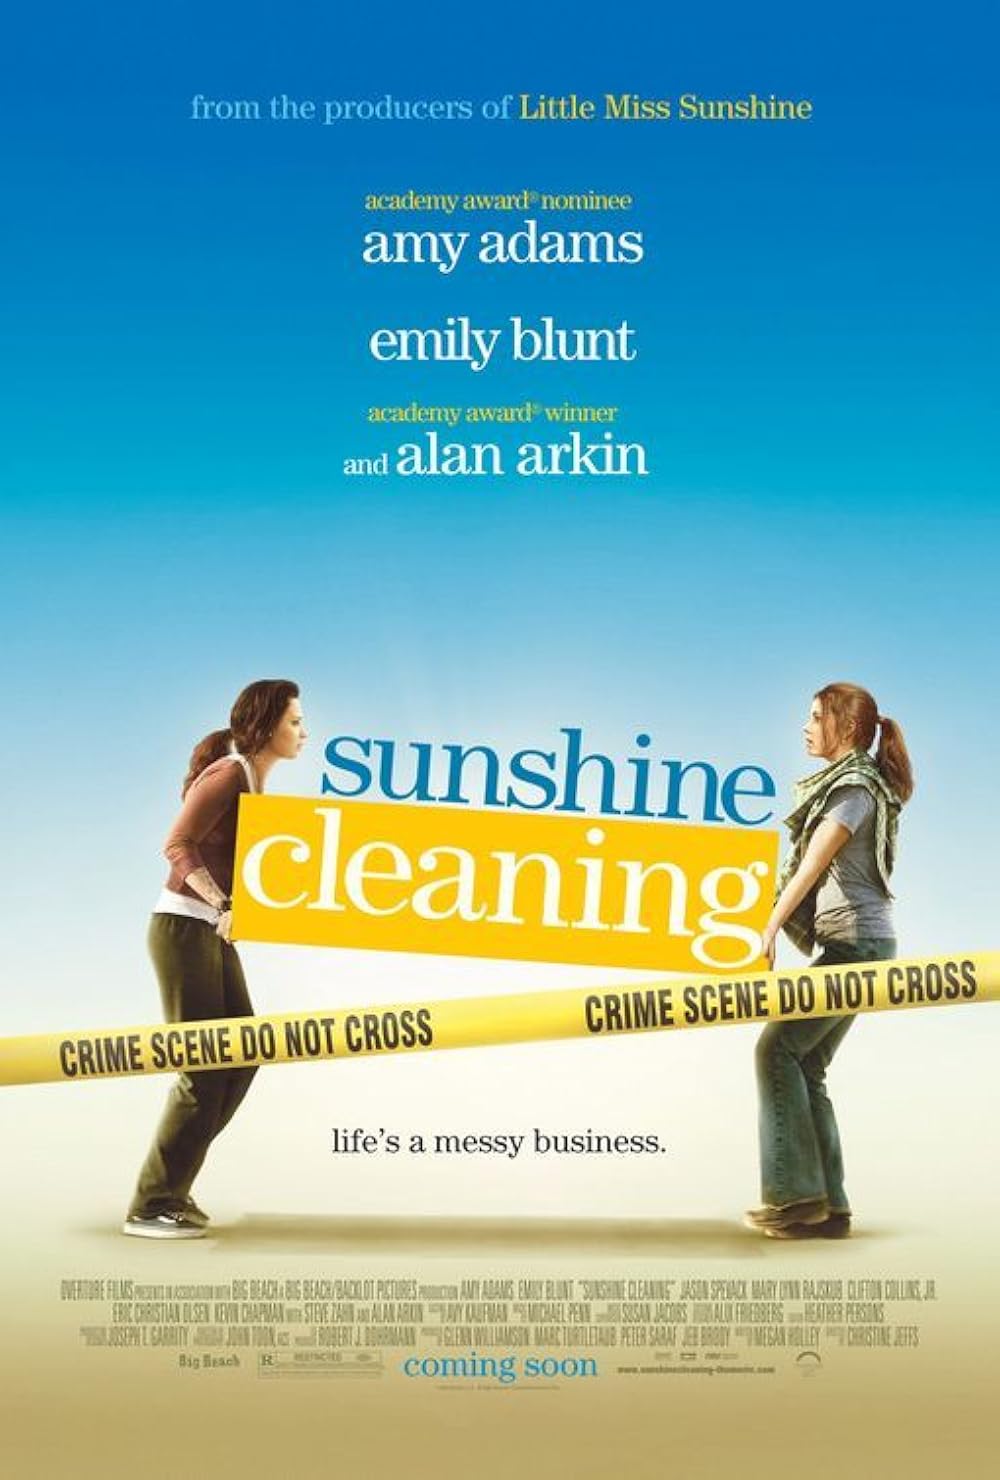 andrew marcinkowski recommends sunshine cleaning topless cleaning pic